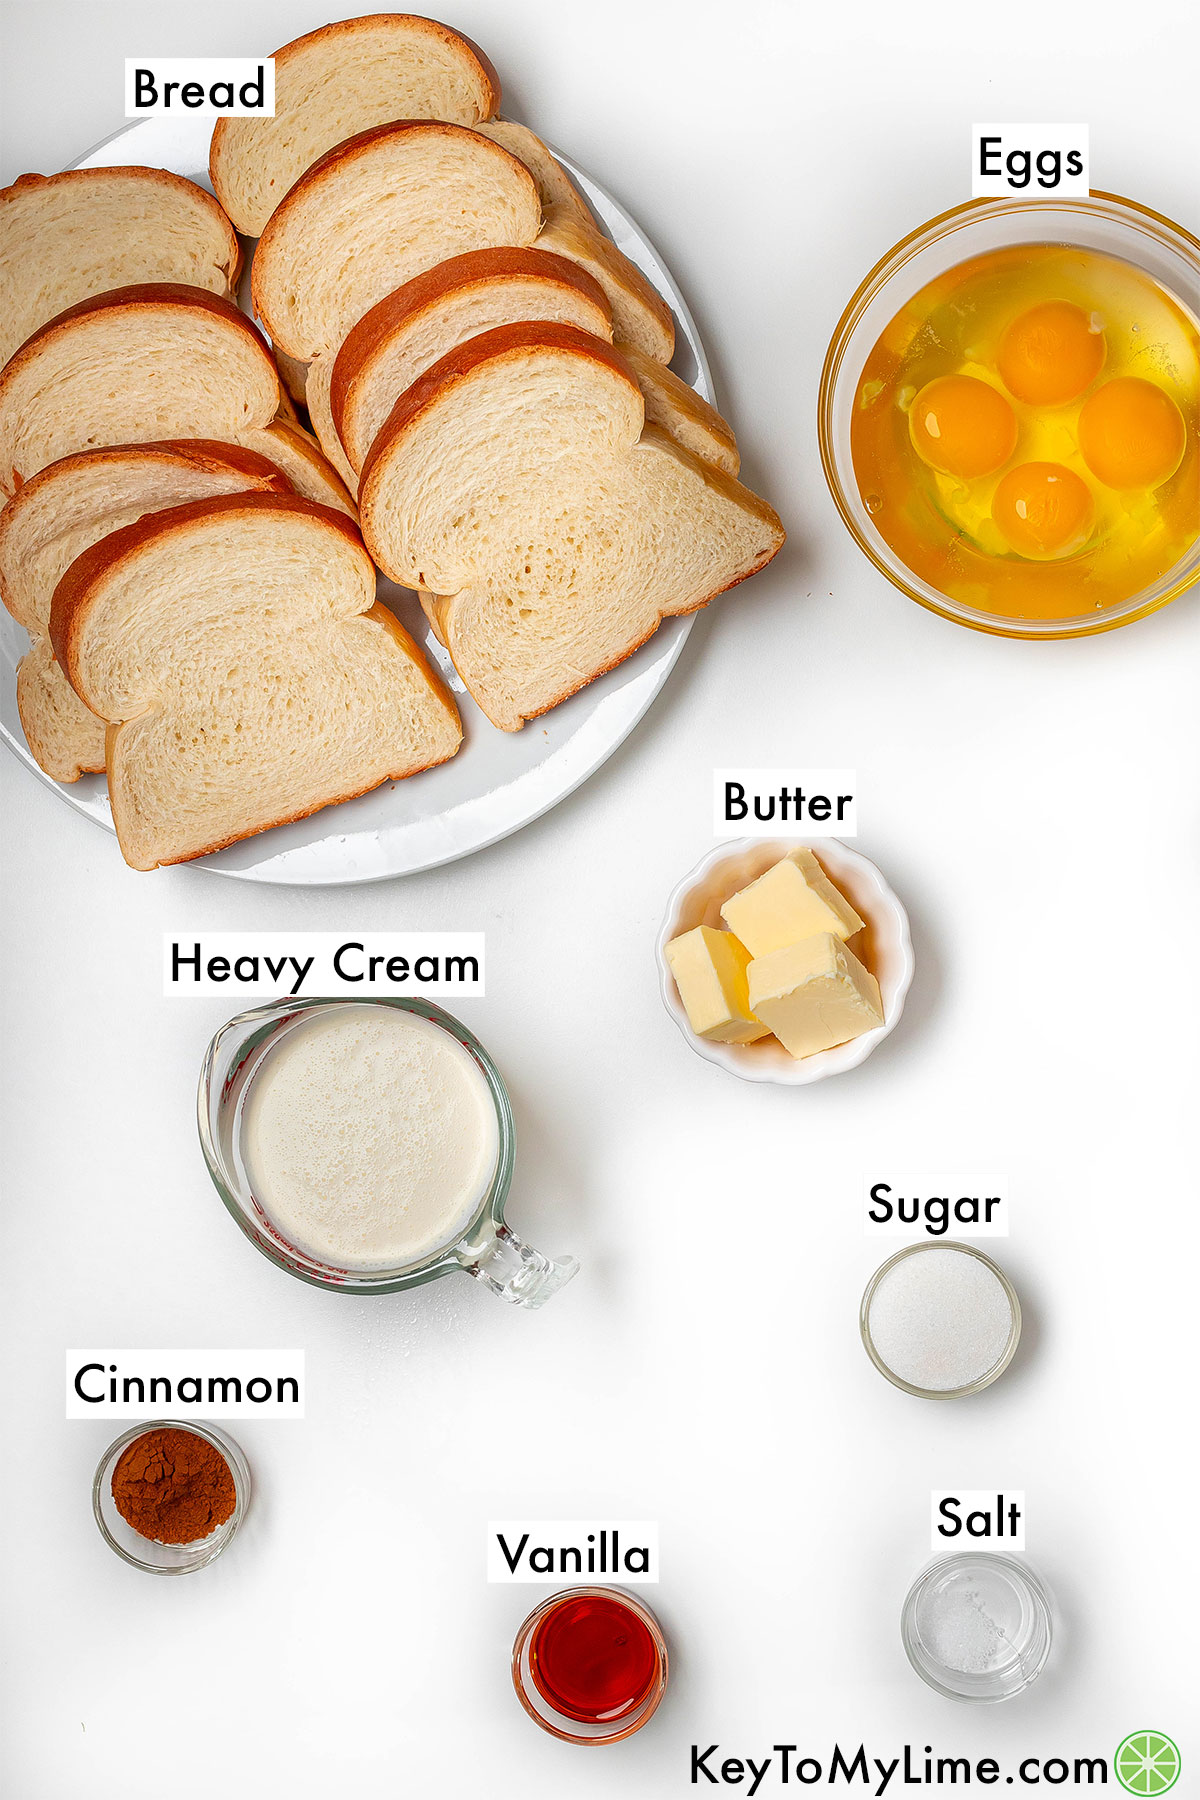 The labeled ingredients for how to make cinnamon French toast.